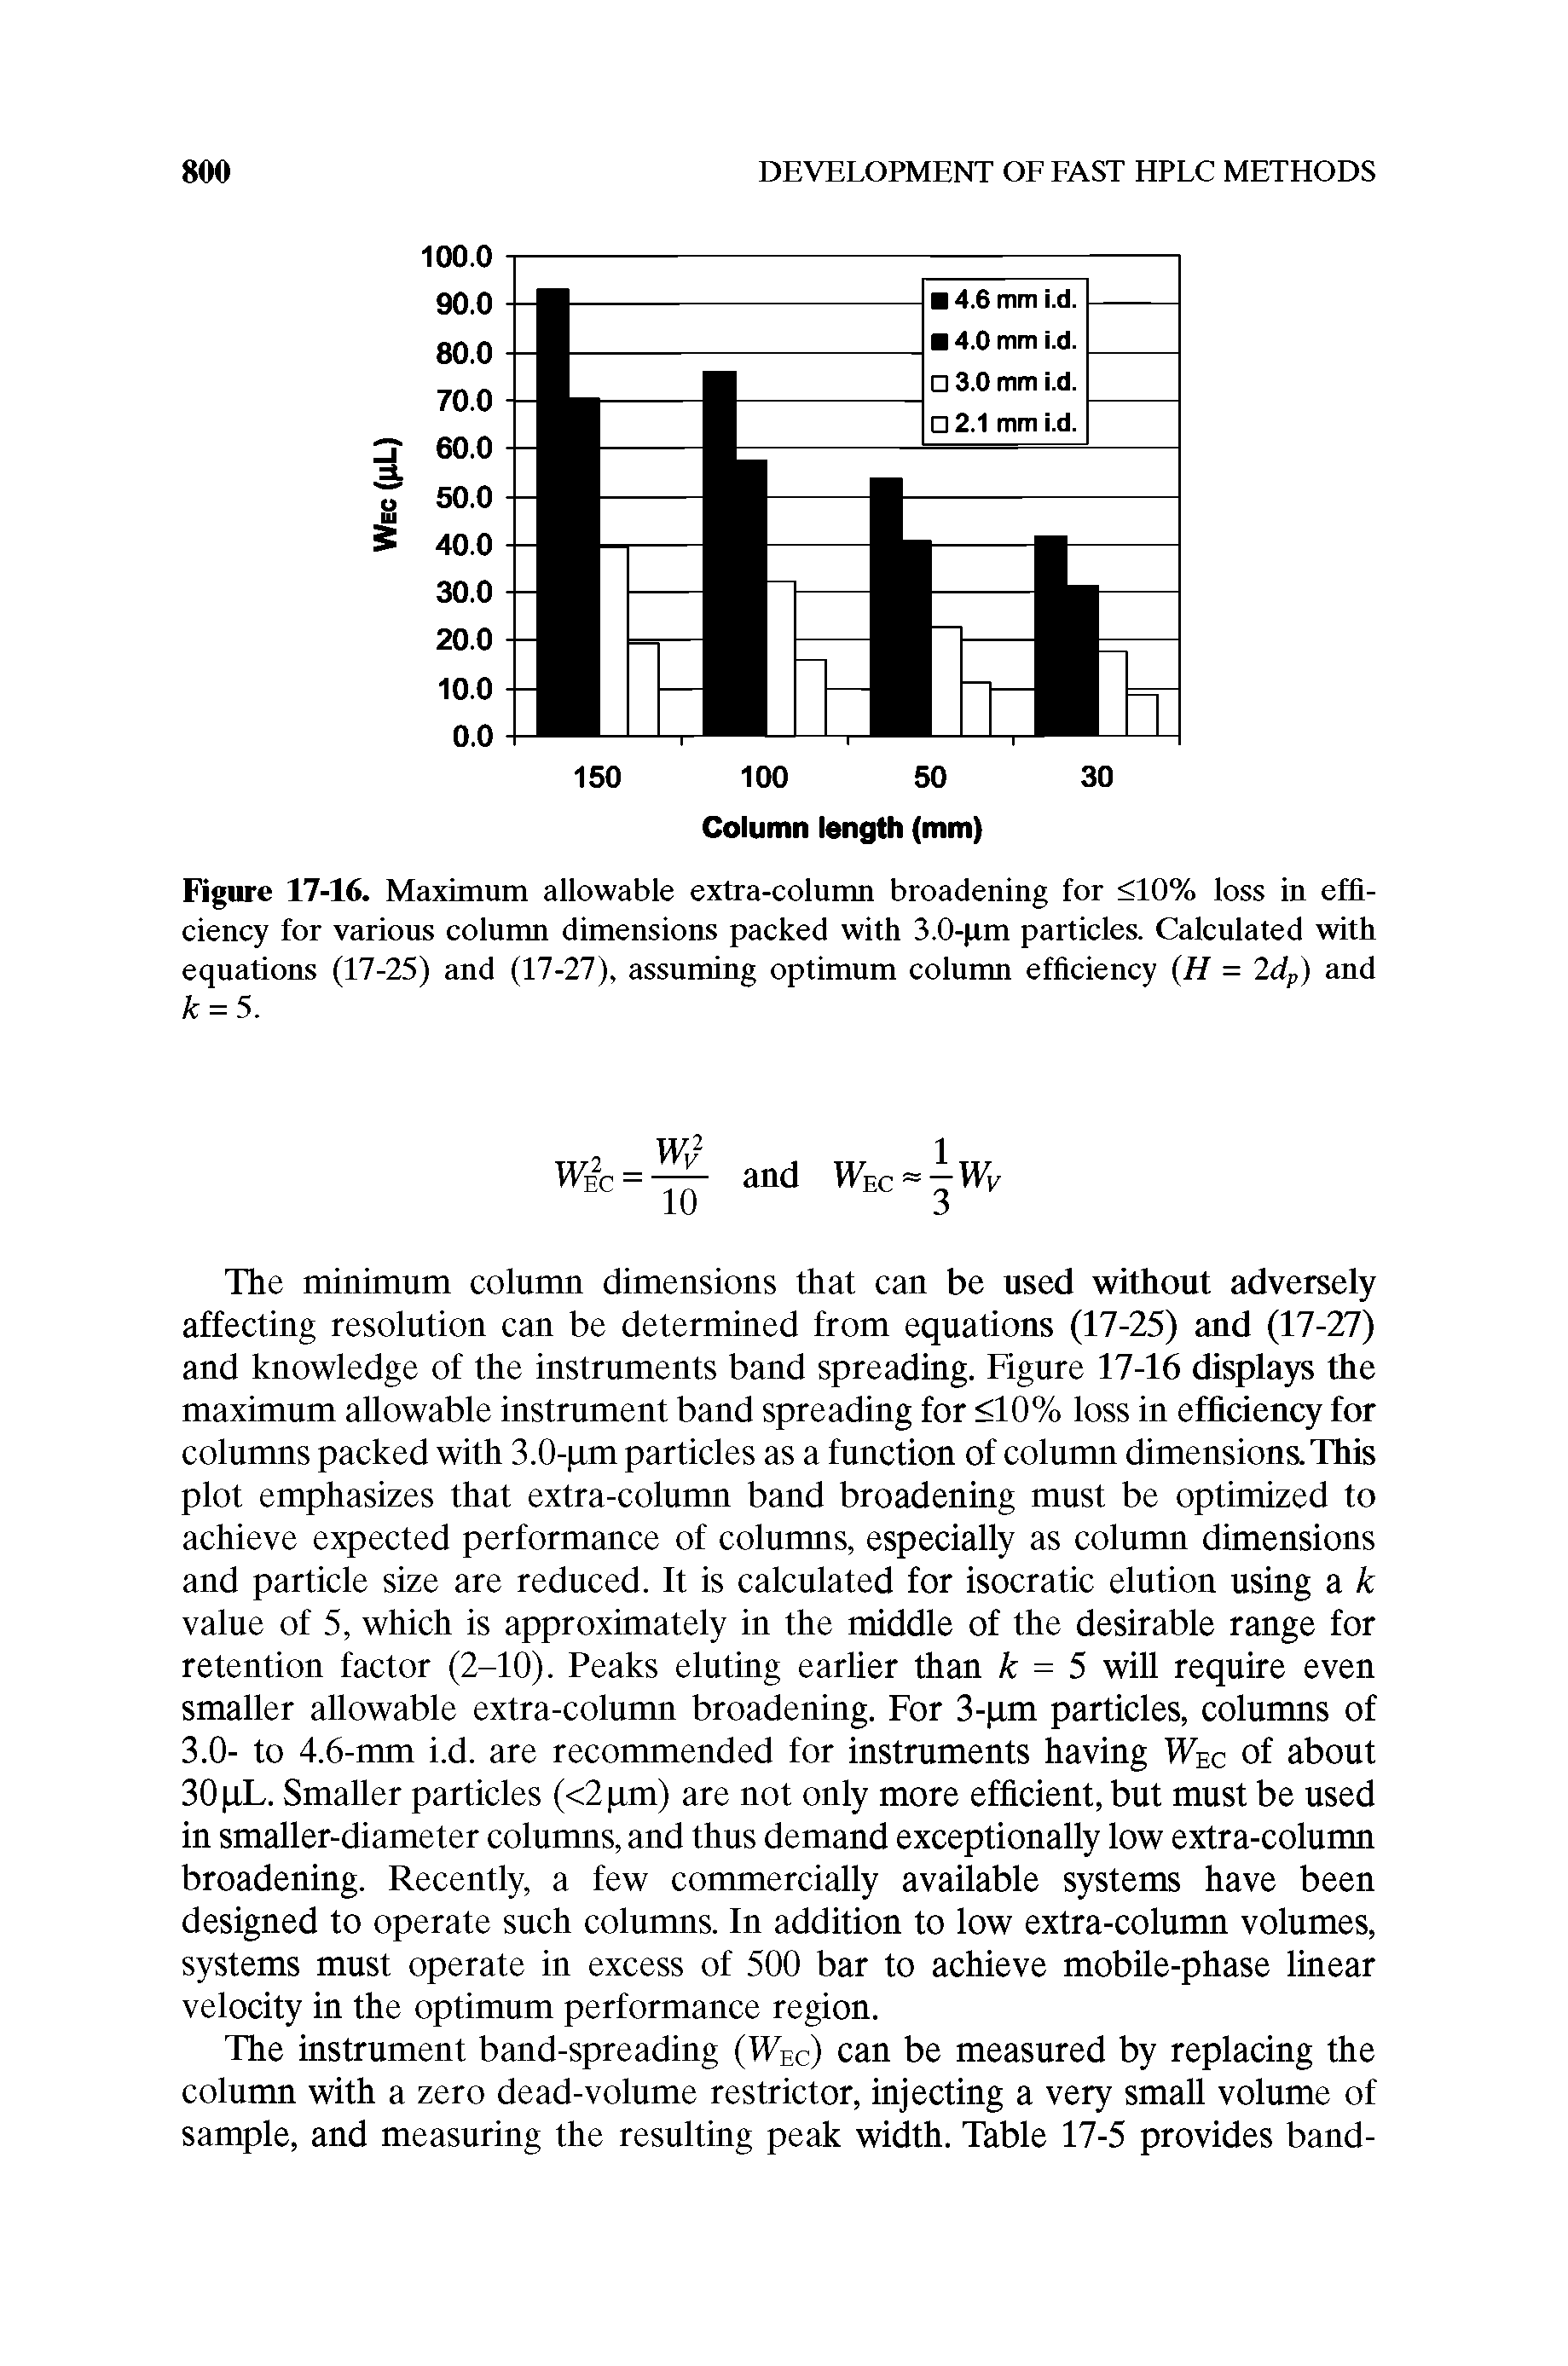 Figure 17-16. Maximum allowable extra-column broadening for <10% loss in efficiency for varions column dimensions packed with 3.0-pm particles. Calculated with equations (17-25) and (17-27), assuming optimum column efficiency (H = 2dp) and k = 5.